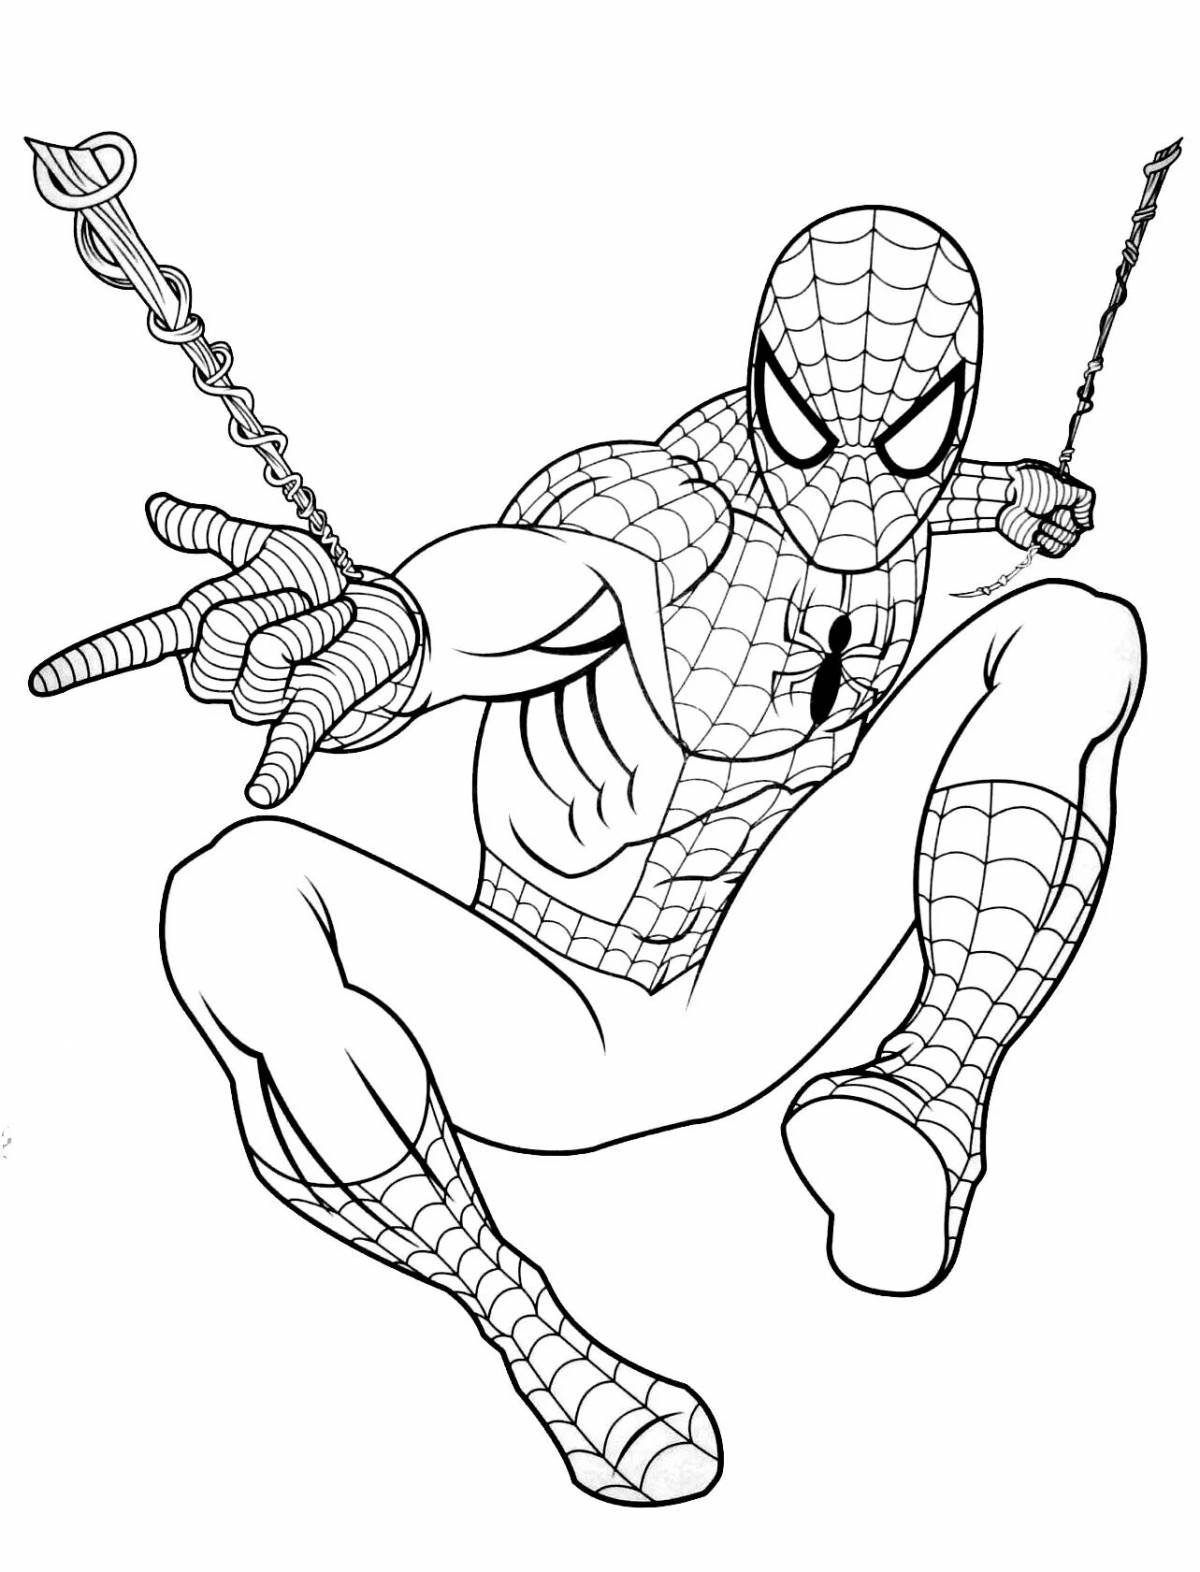 Dazzling Christmas Spiderman coloring book